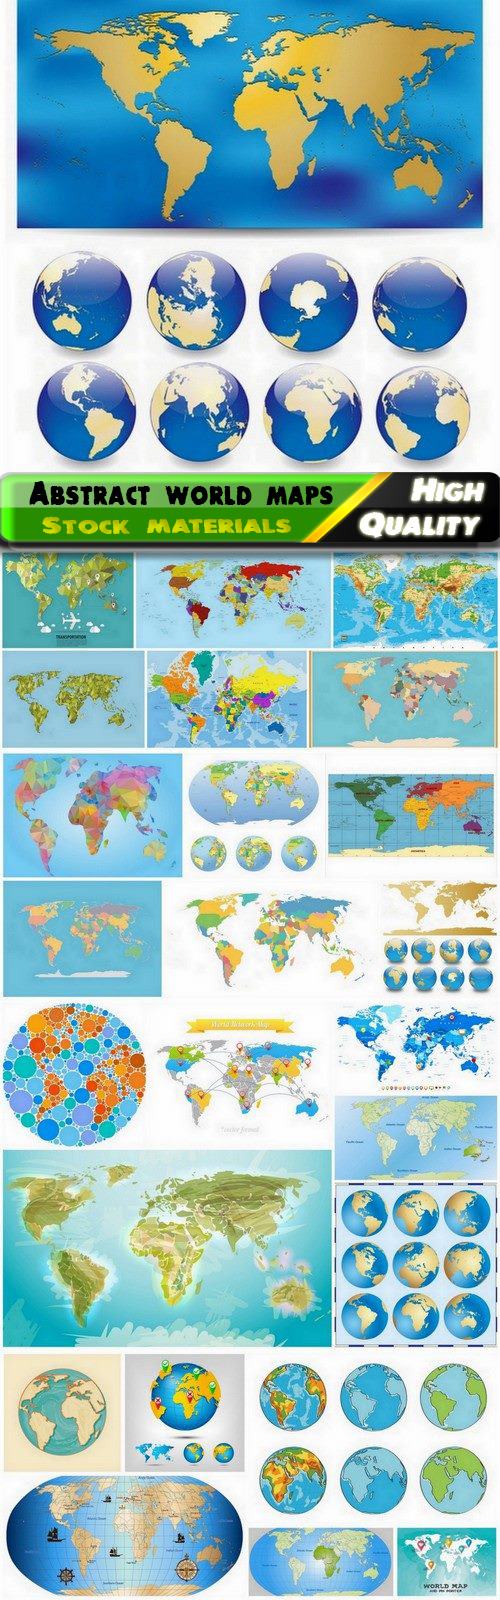 Abstract world globe and world maps - 25 Eps